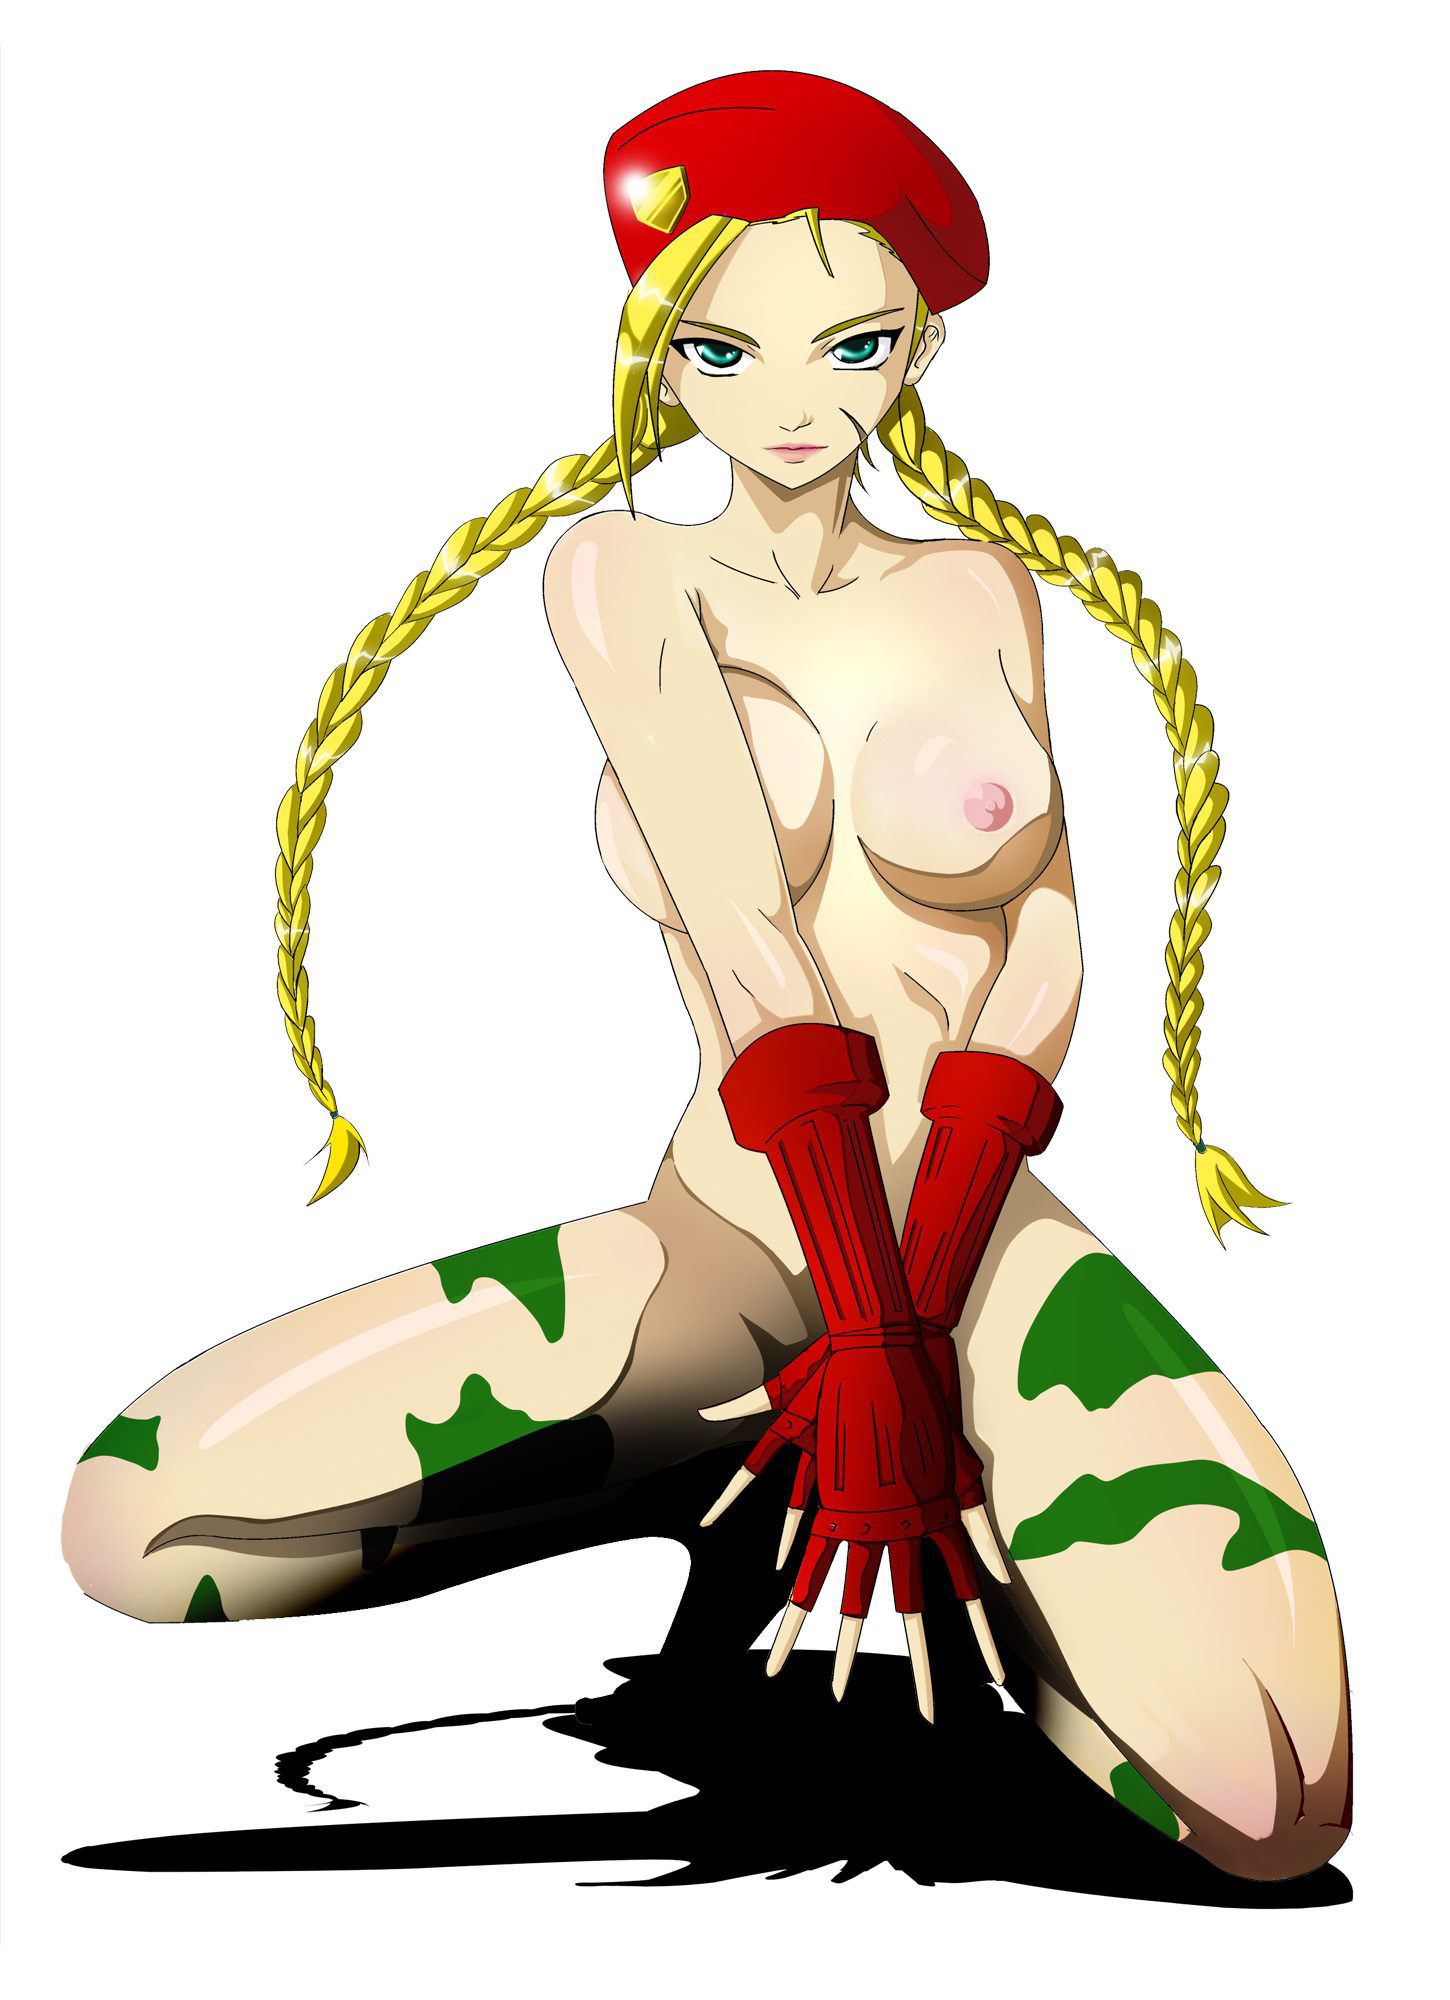 (Street fighter) or try enjoying Cammy White Army grew up in tight body! 6